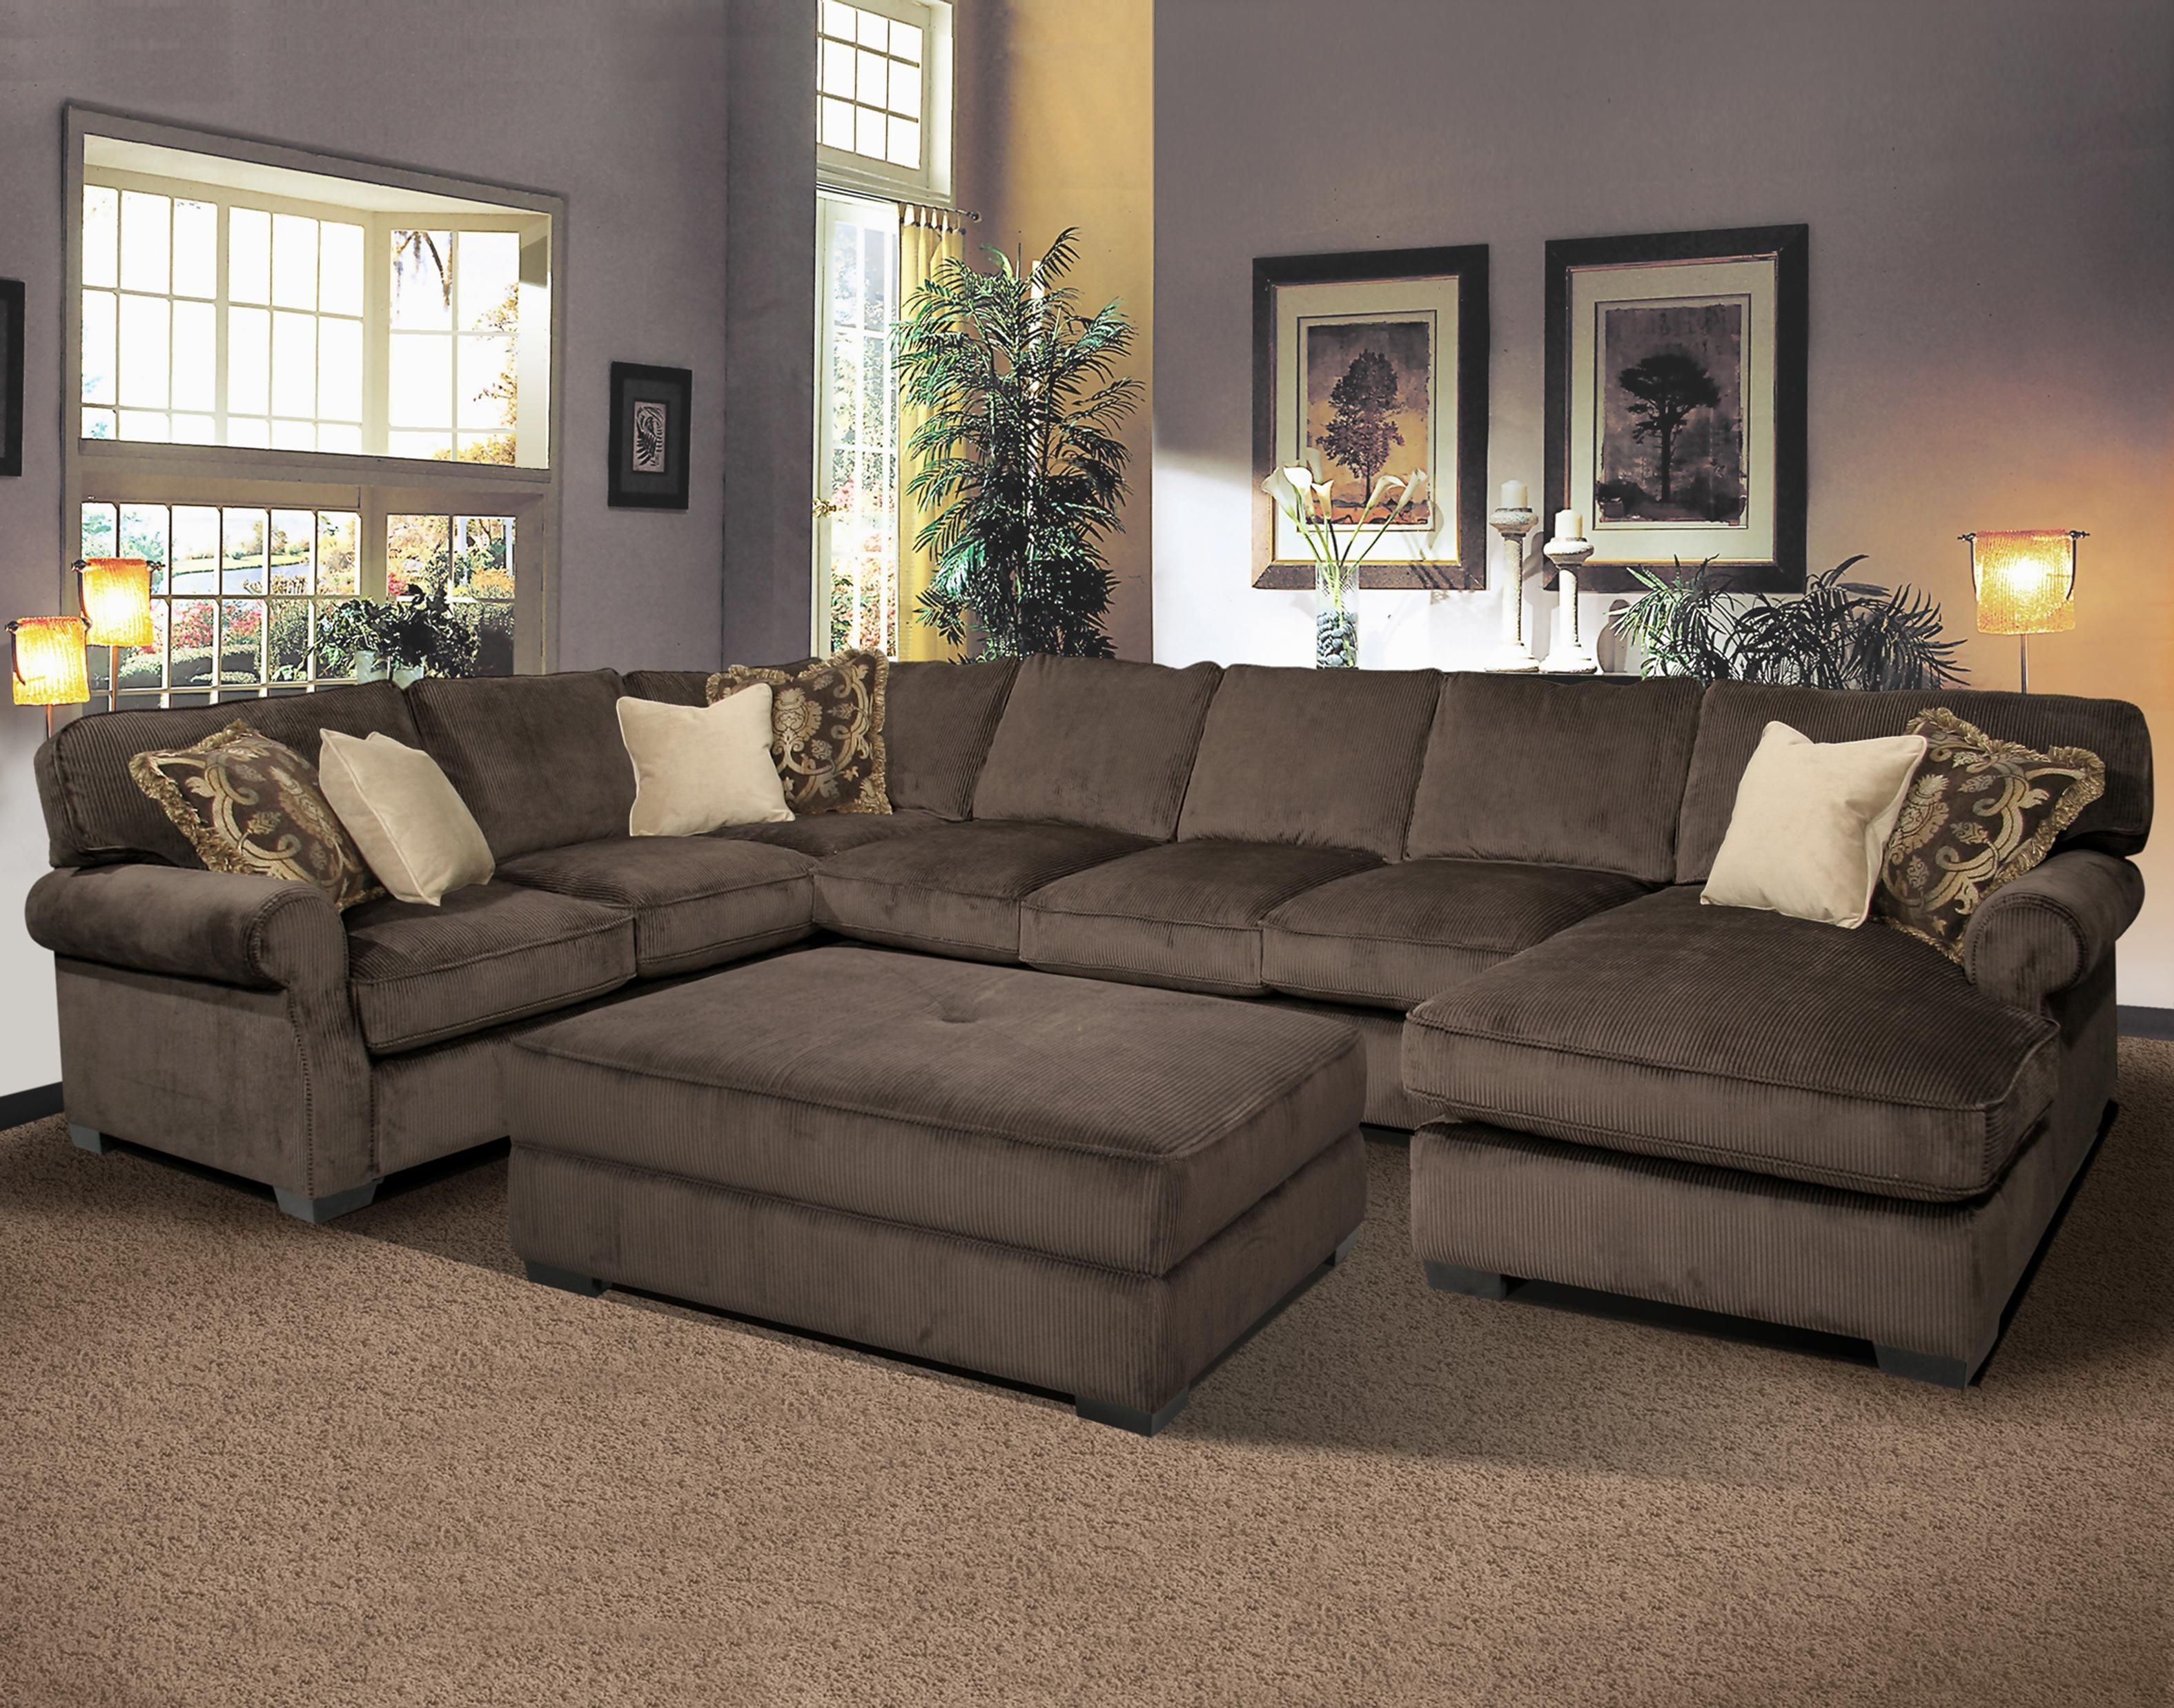 Big And Comfy Grand Island Large, 7 Seat Sectional Sofa With Right Pertaining To Long Sectional Sofas With Chaise (View 6 of 10)